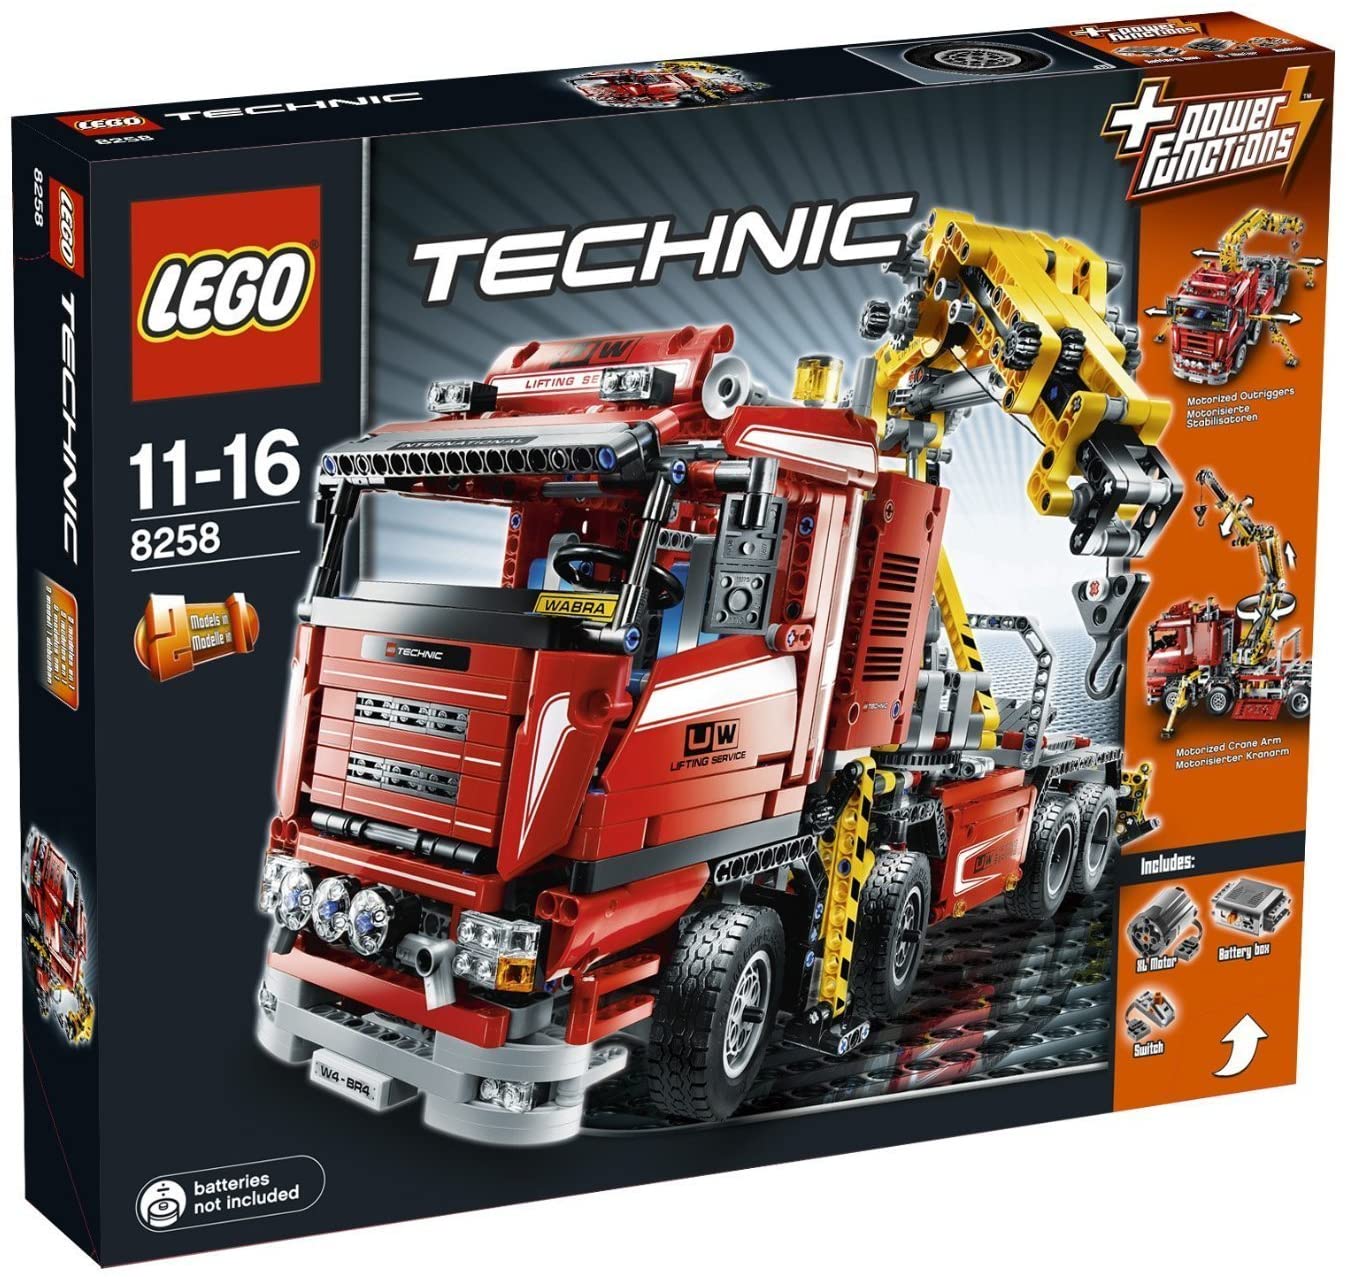 7 Best LEGO Crane Sets 2023 - Buying Guide & Reviews 6